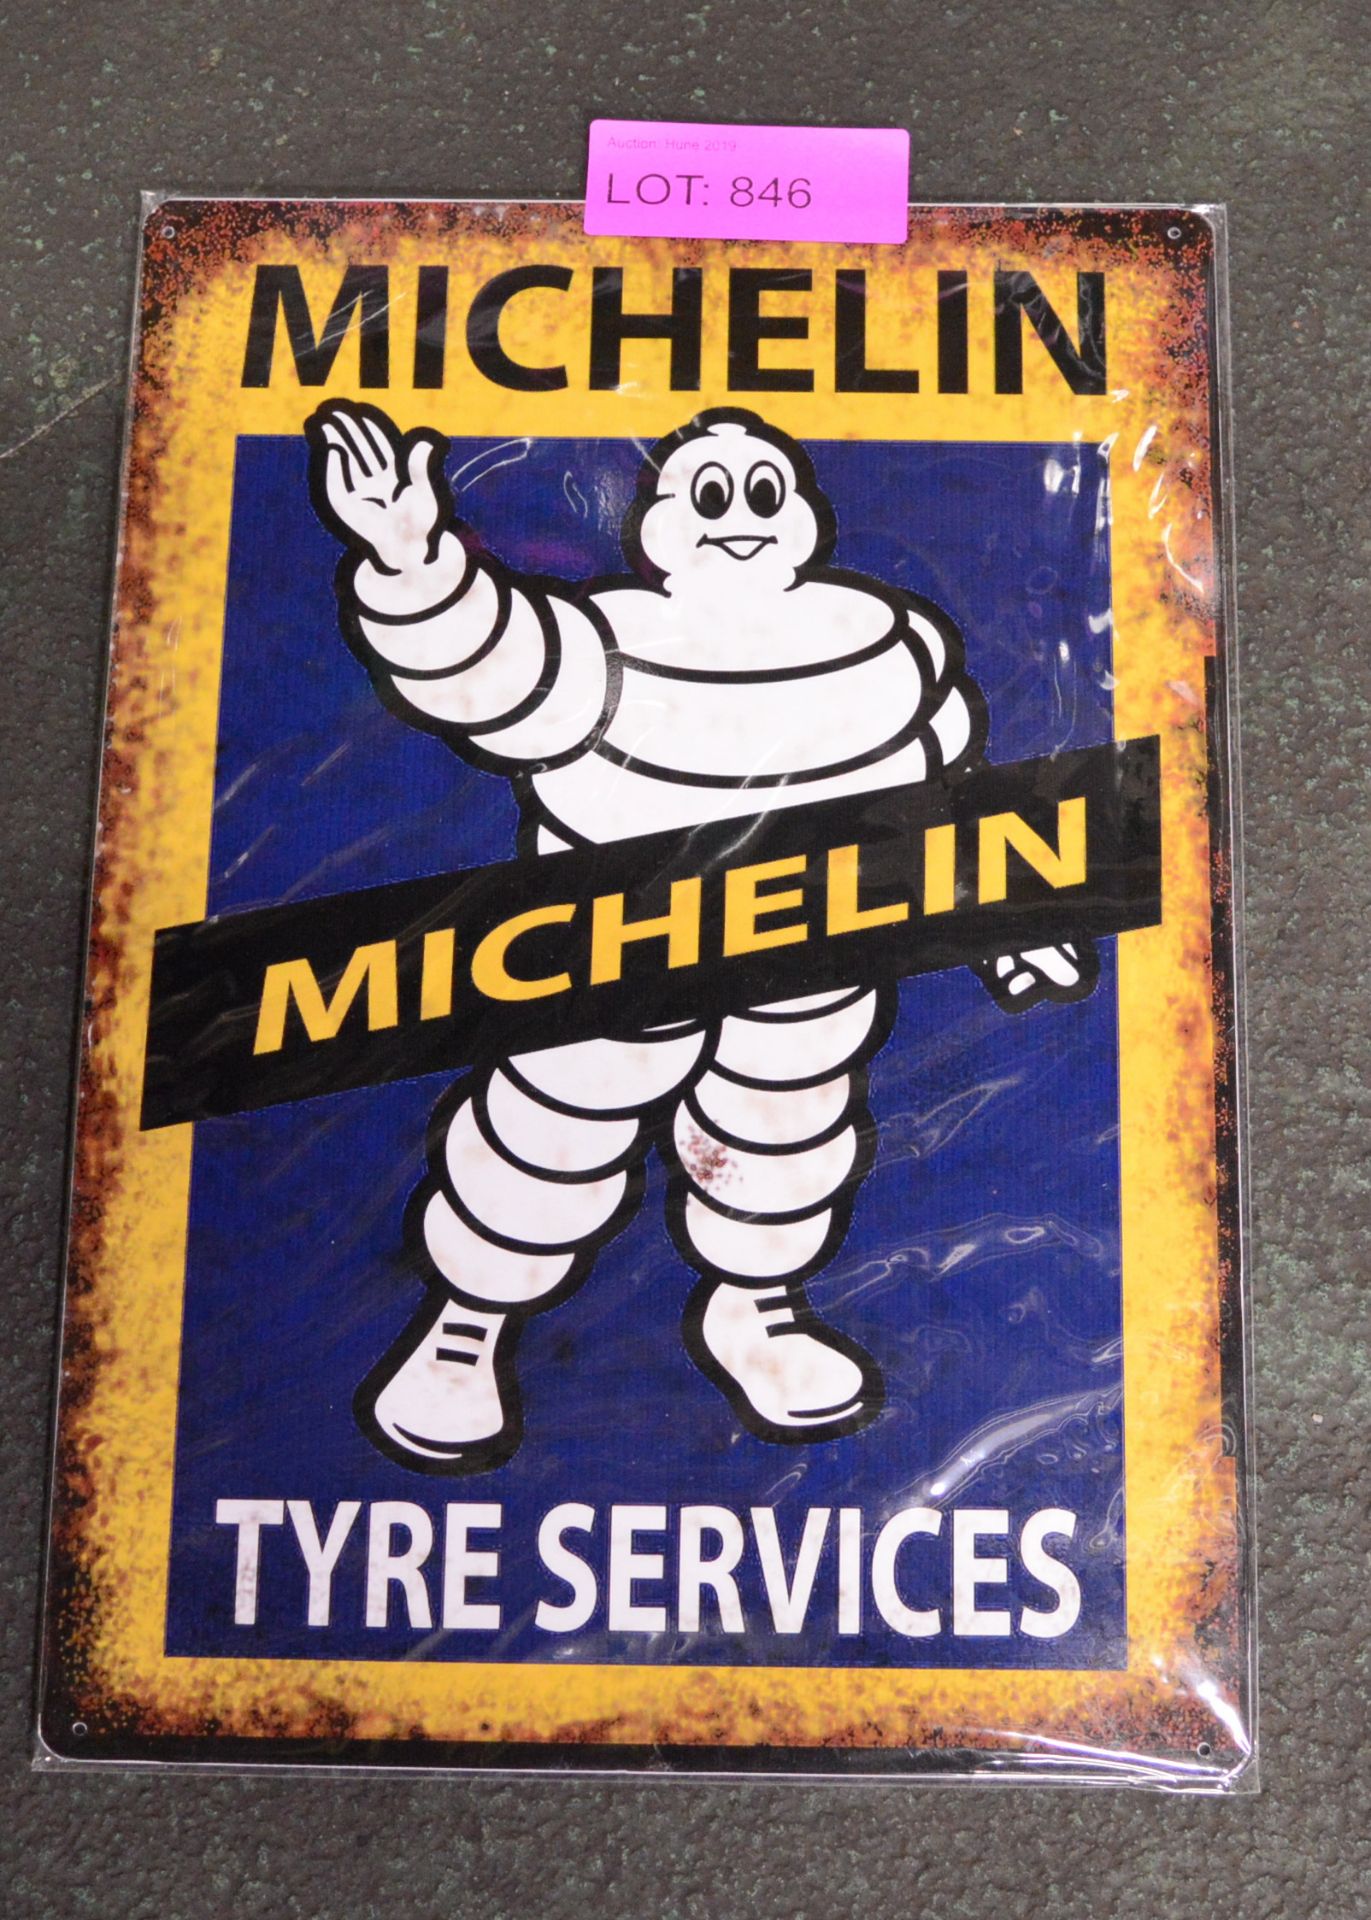 Michelin Tyre Services Tin Sign